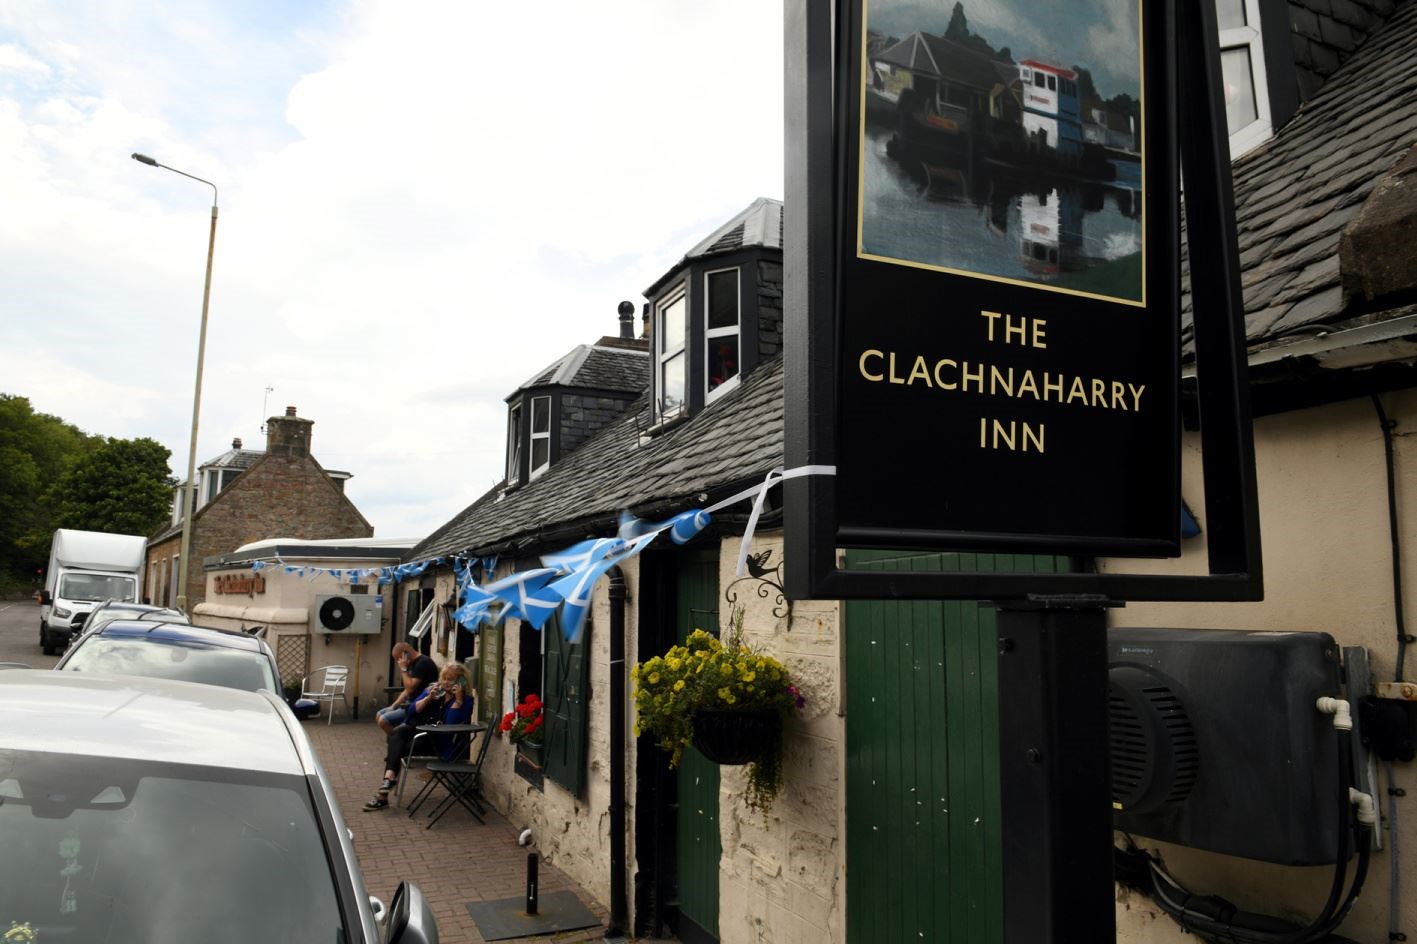 The Clachnaharry Inn is ideally placed on the edge of town.